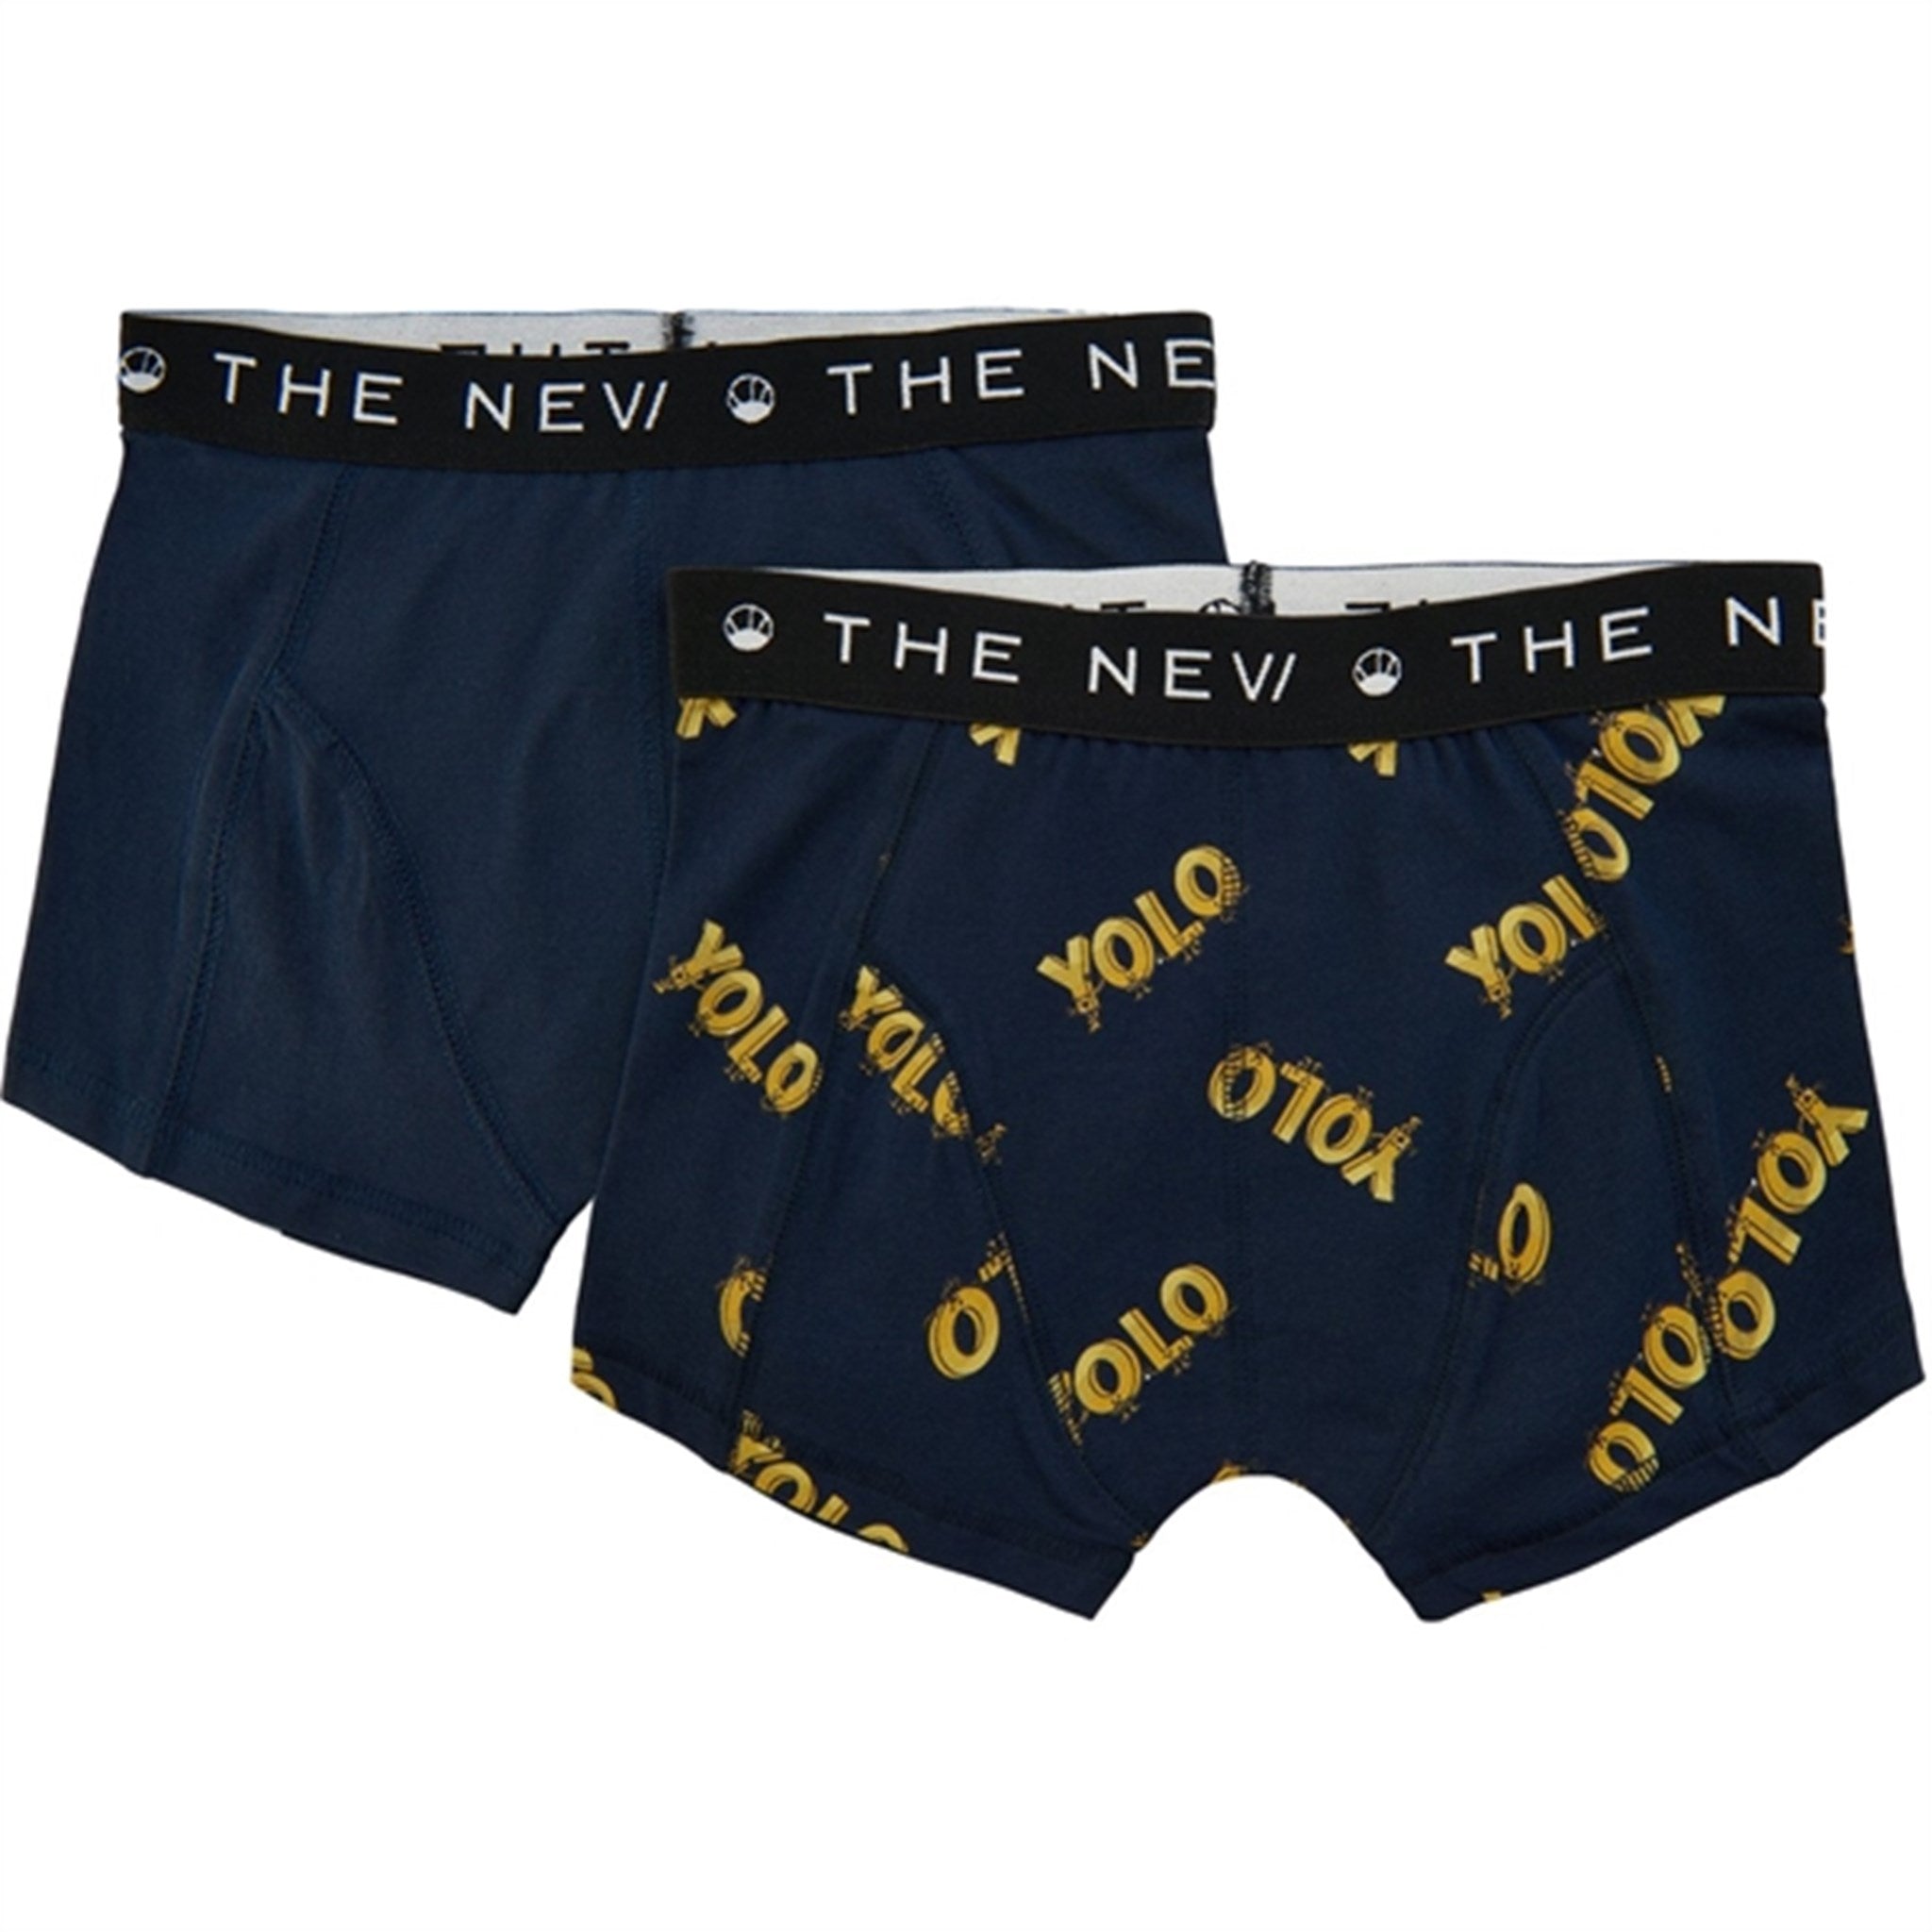 THE NEW Navy Blazer Boxers 2-pack